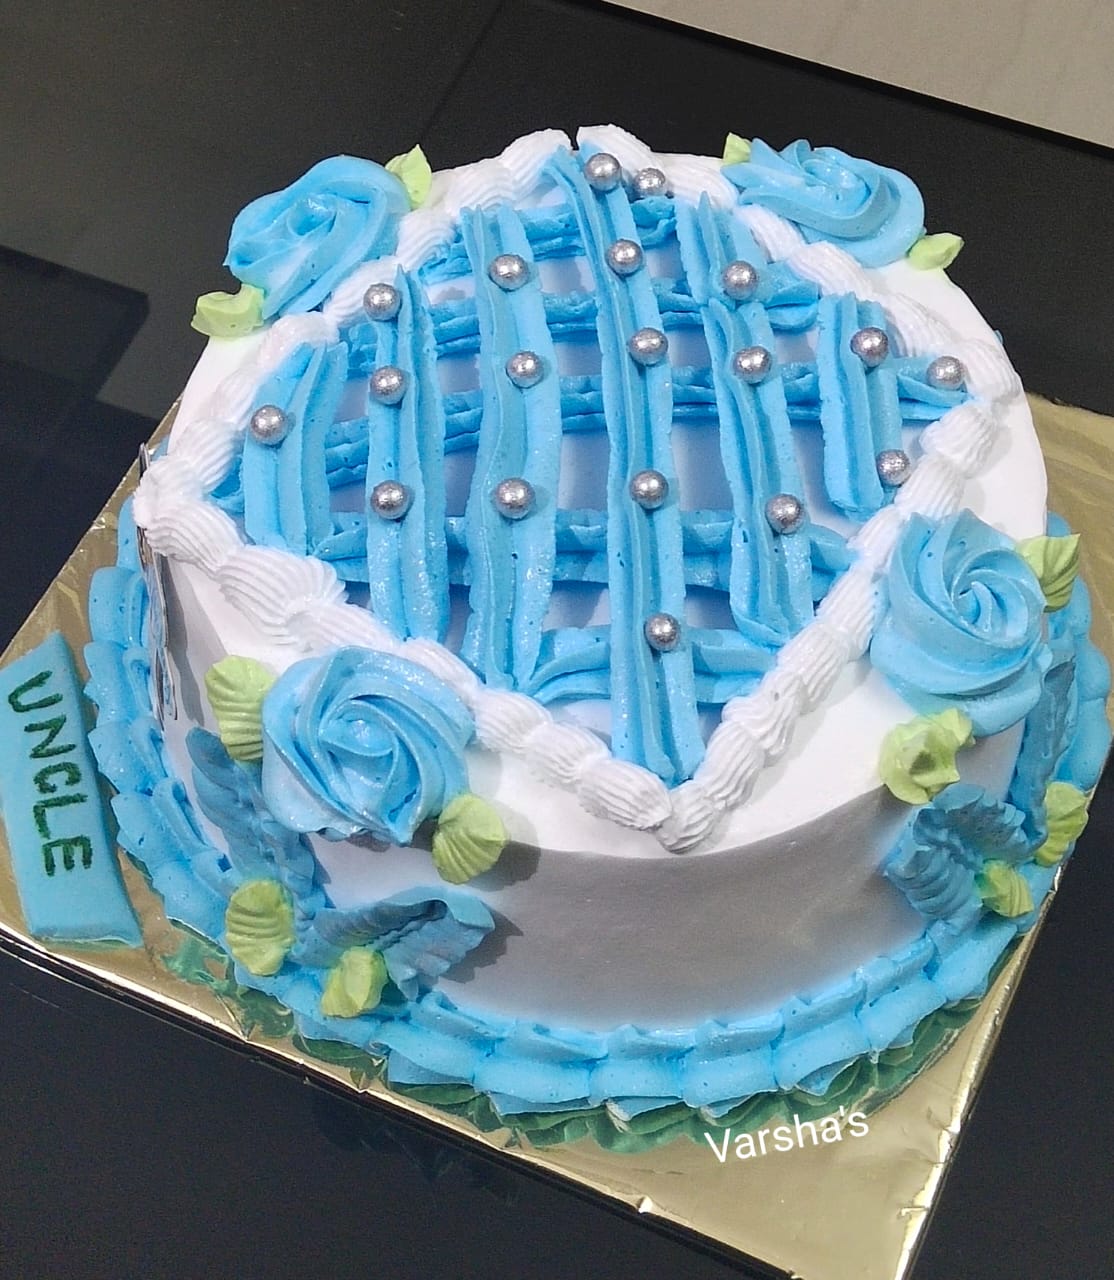 BlueBerry Cake Designs, Images, Price Near Me